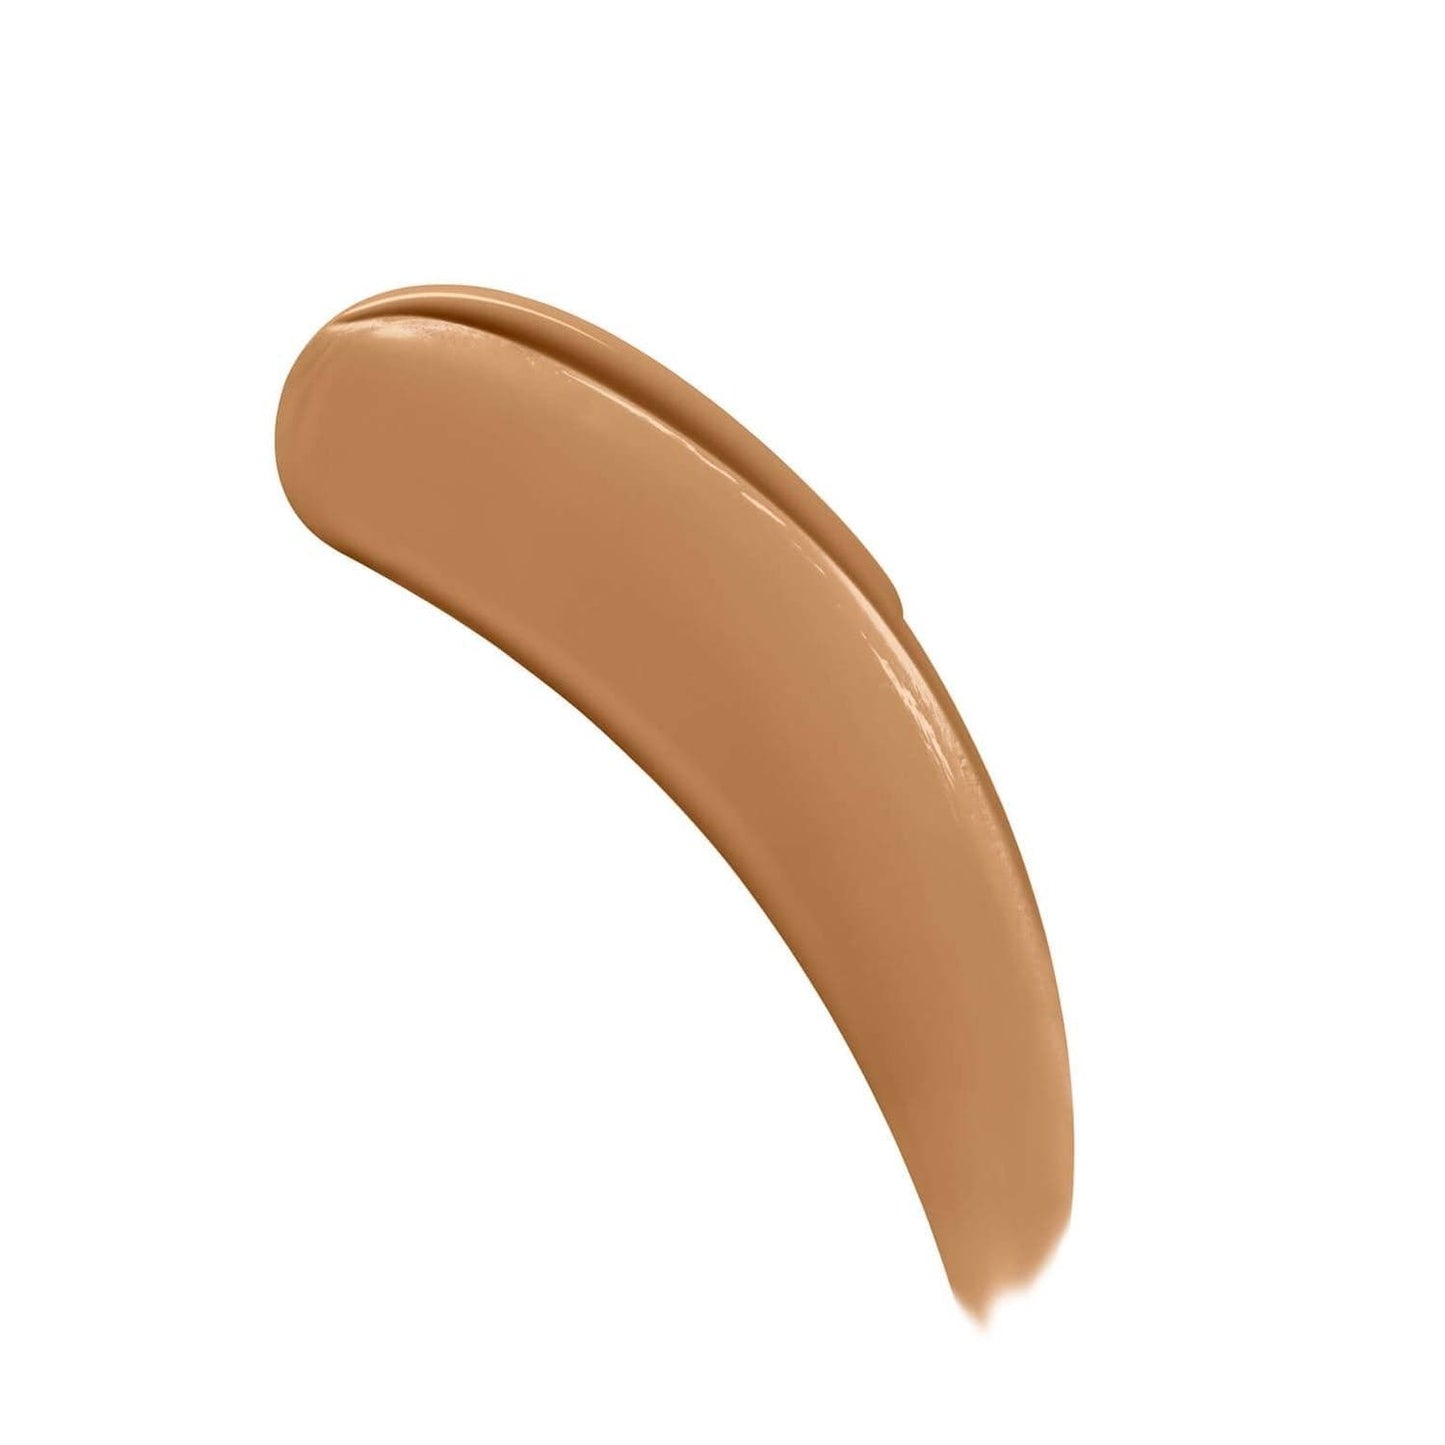 IT COSMETICS Beauty IT Cosmetics Your Skin But Better Foundation and Skincare 30ml - 43 Tan Warm